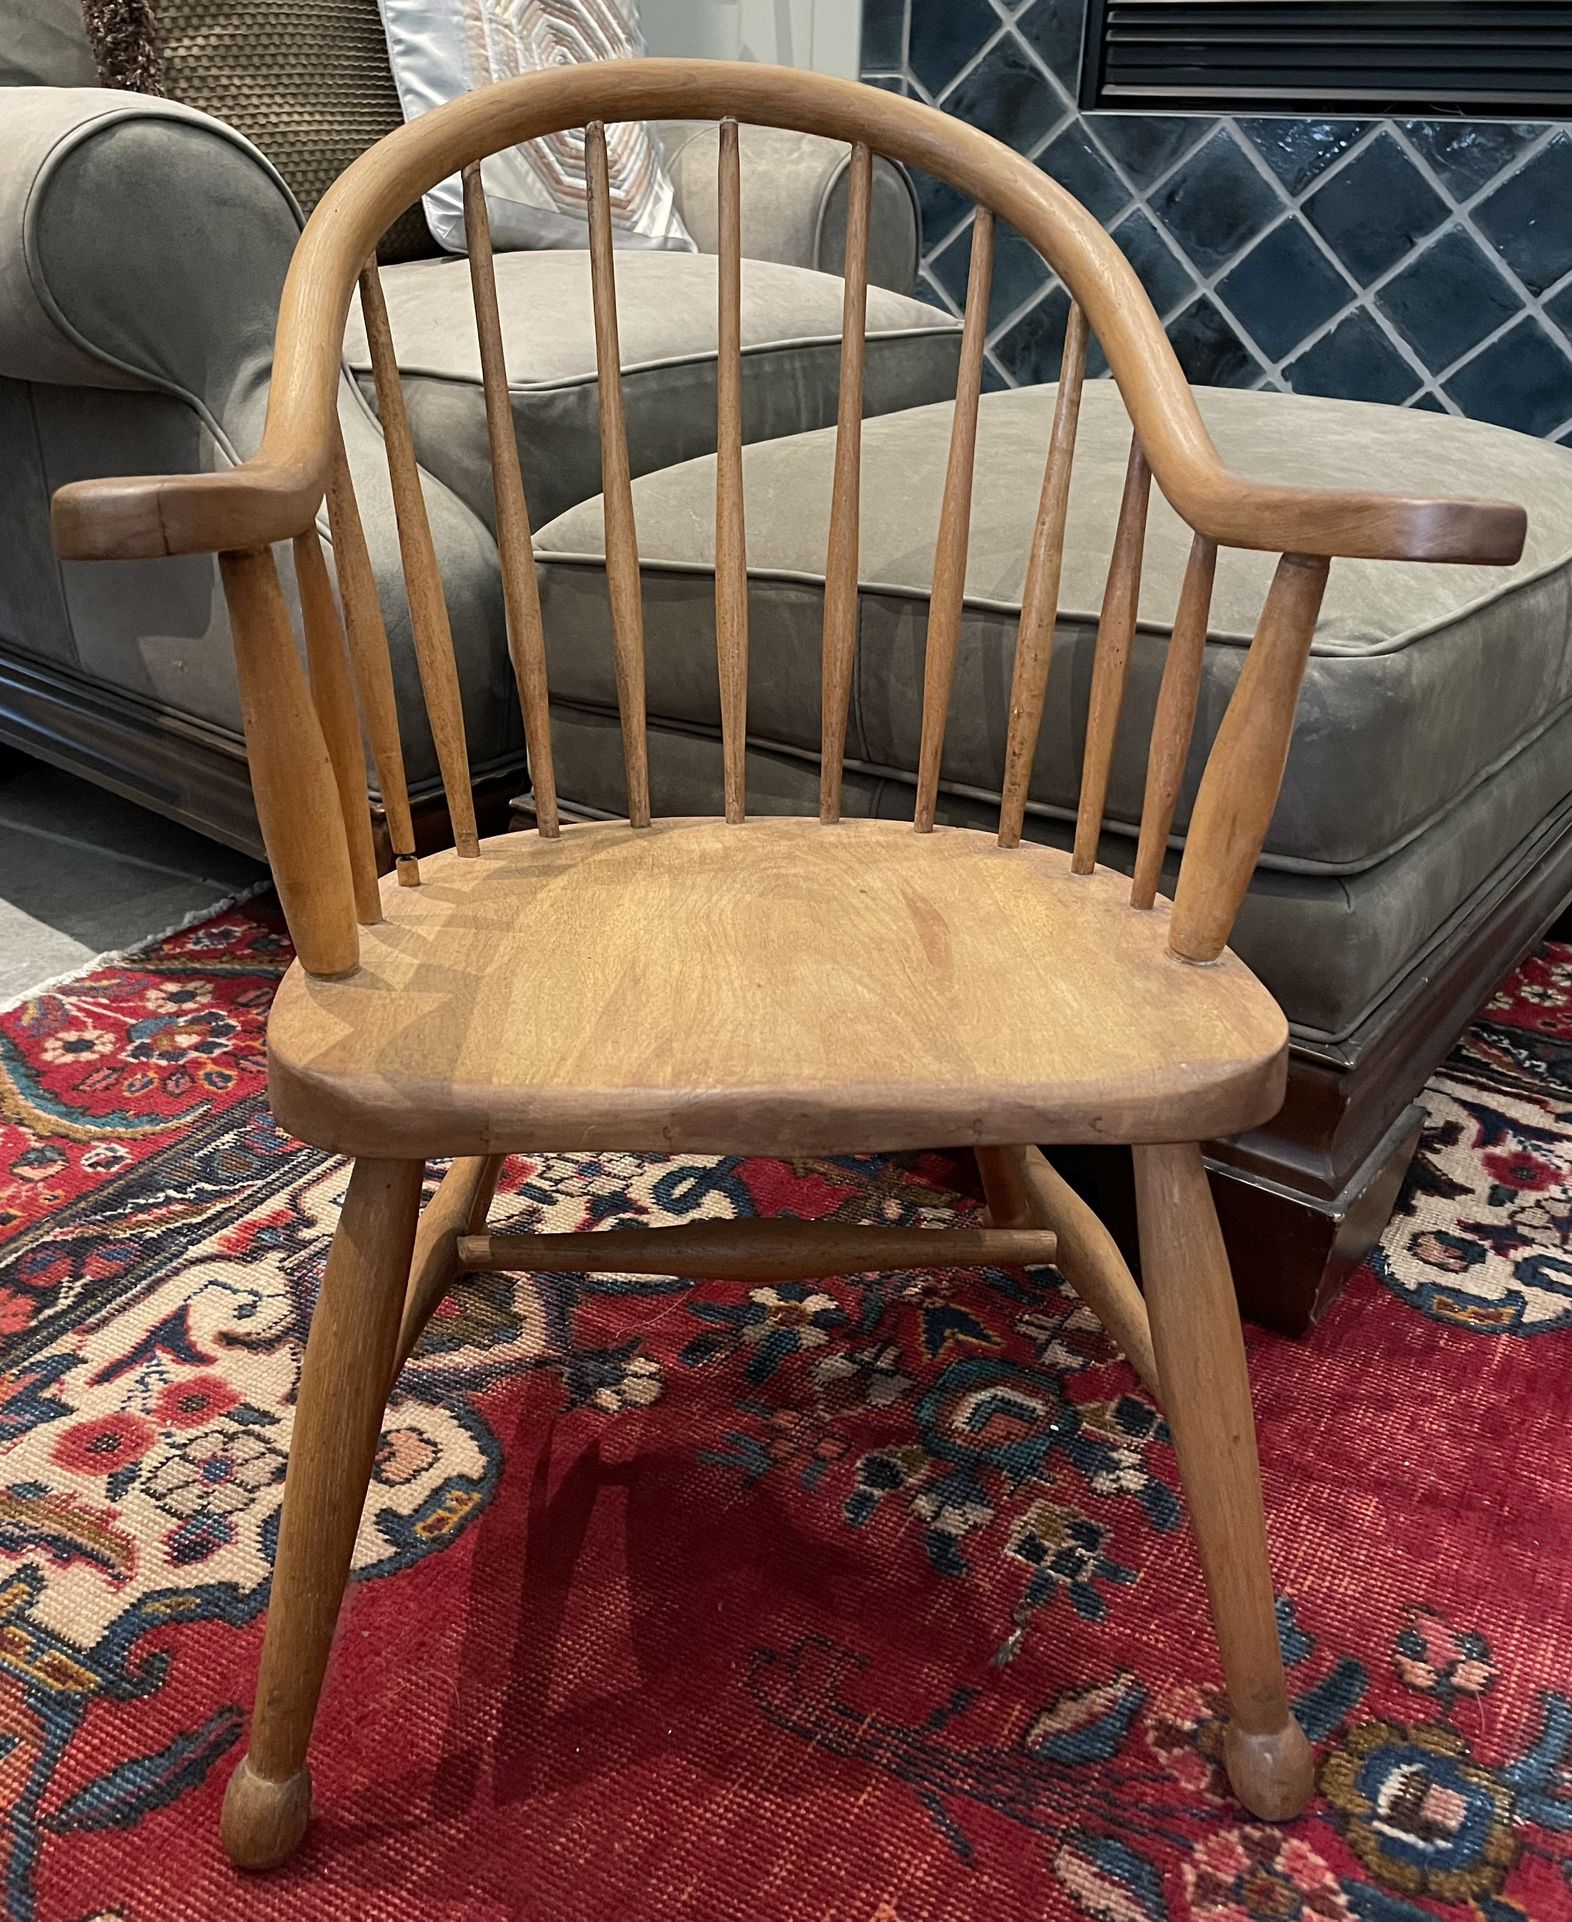 Wooden Chair - Child Size